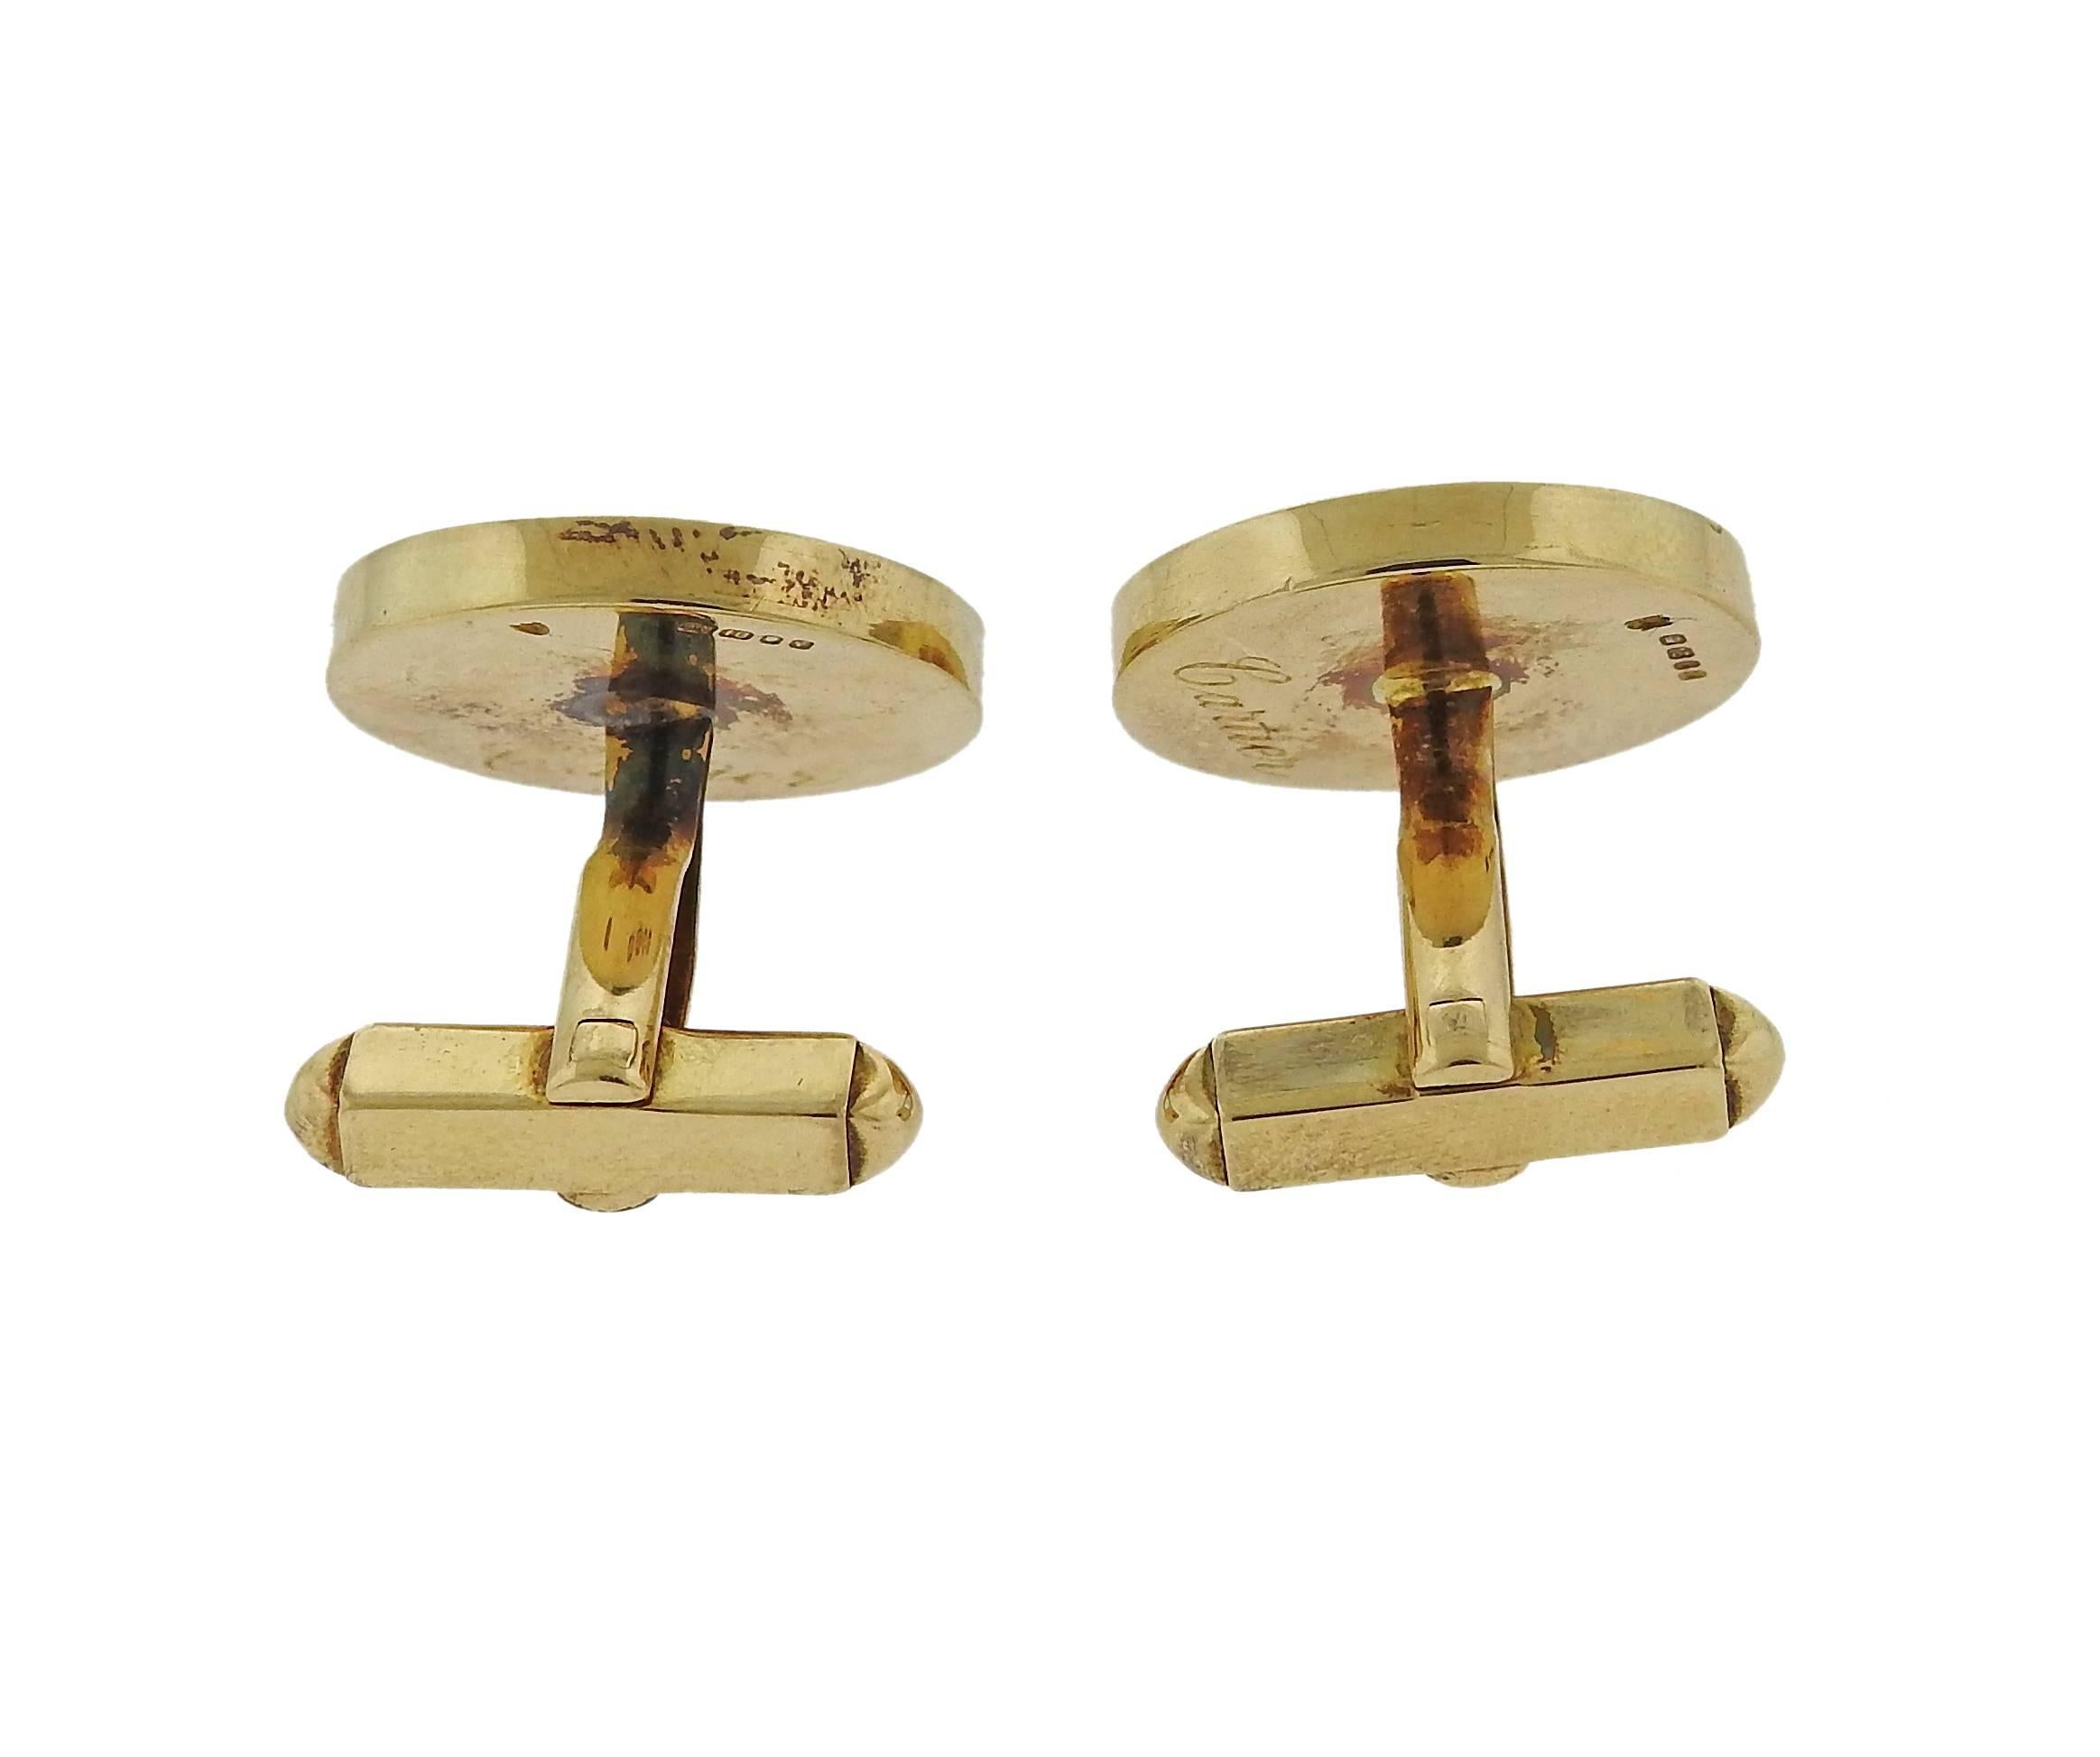 A pair of 18k yellow gold honeycomb design cufflinks, retailed by Cartier, crafted in England. Top of the cufflink measures 20.5mm in diameter, pair weighs 21.8 grams. Marked: Cartier, English gold assay marks,  2816